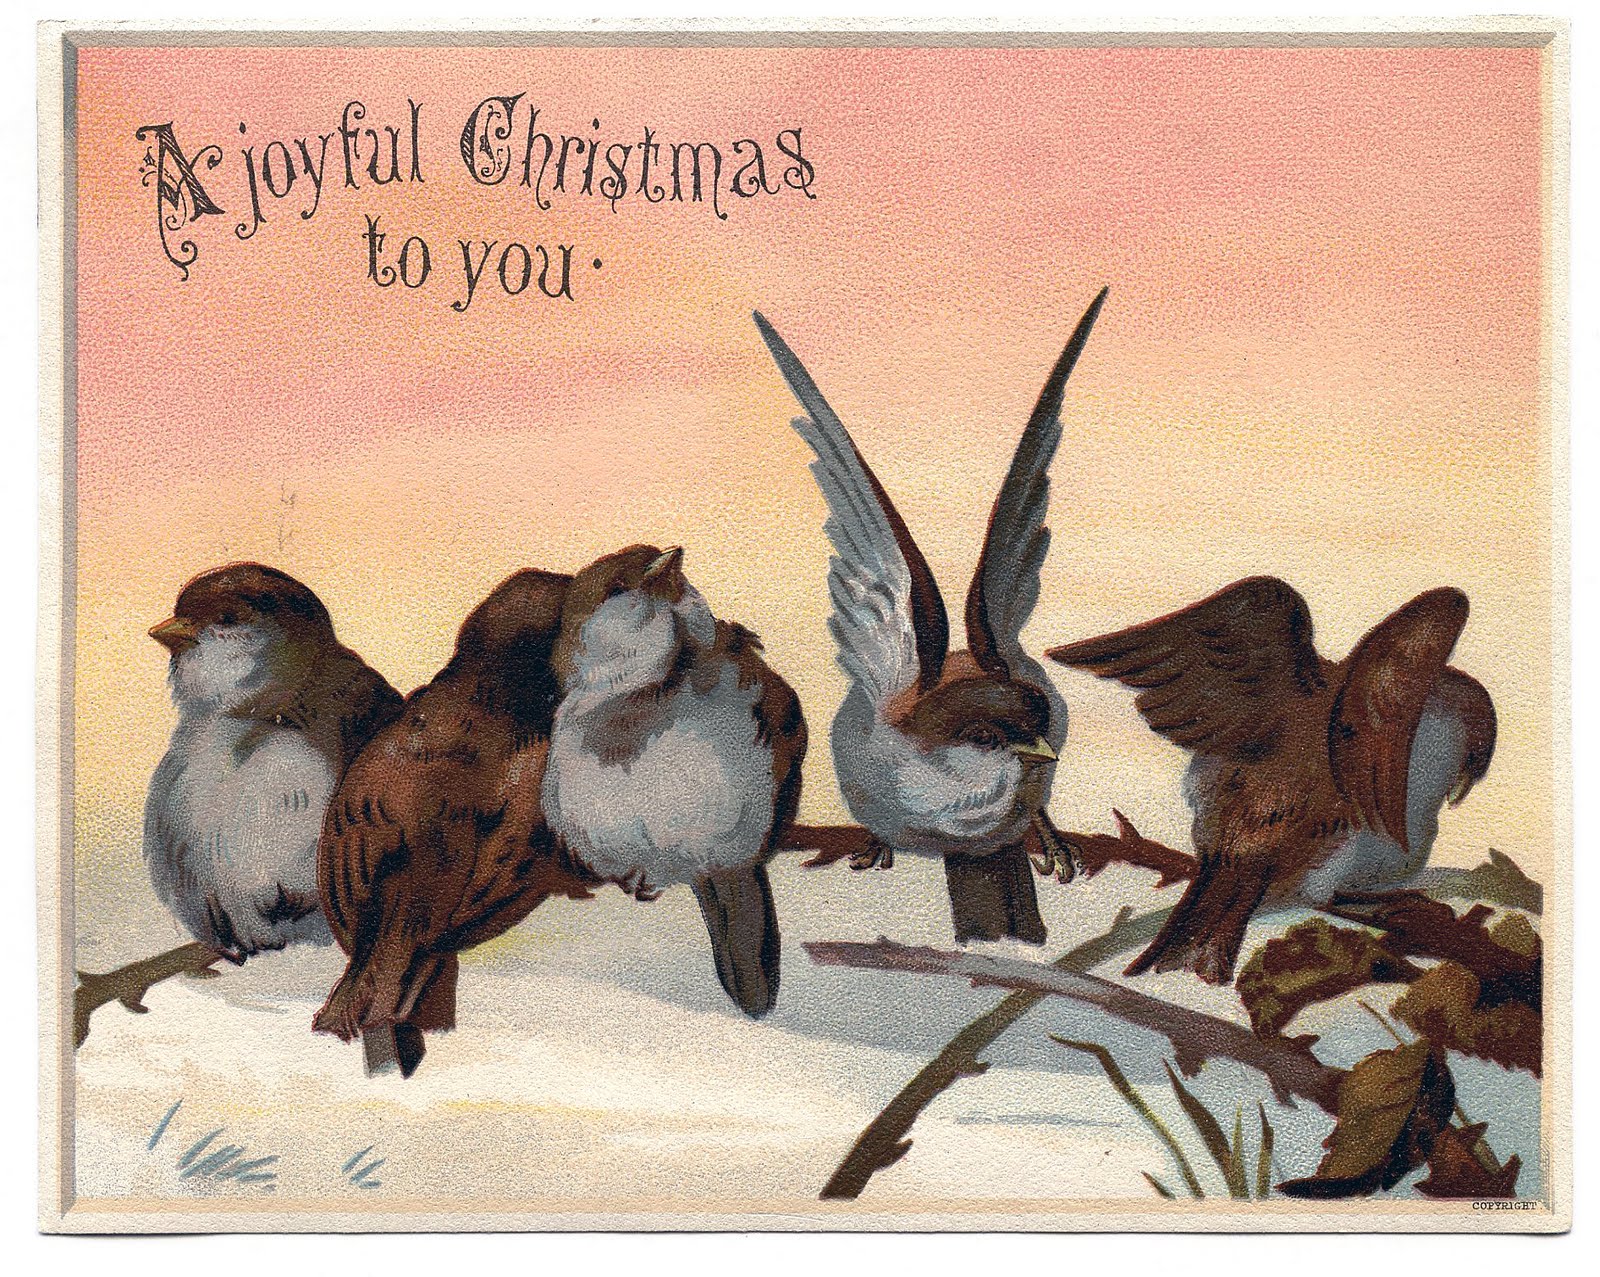 Vintage Christmas Graphic Image   Cute Birds On Branch   The Graphics